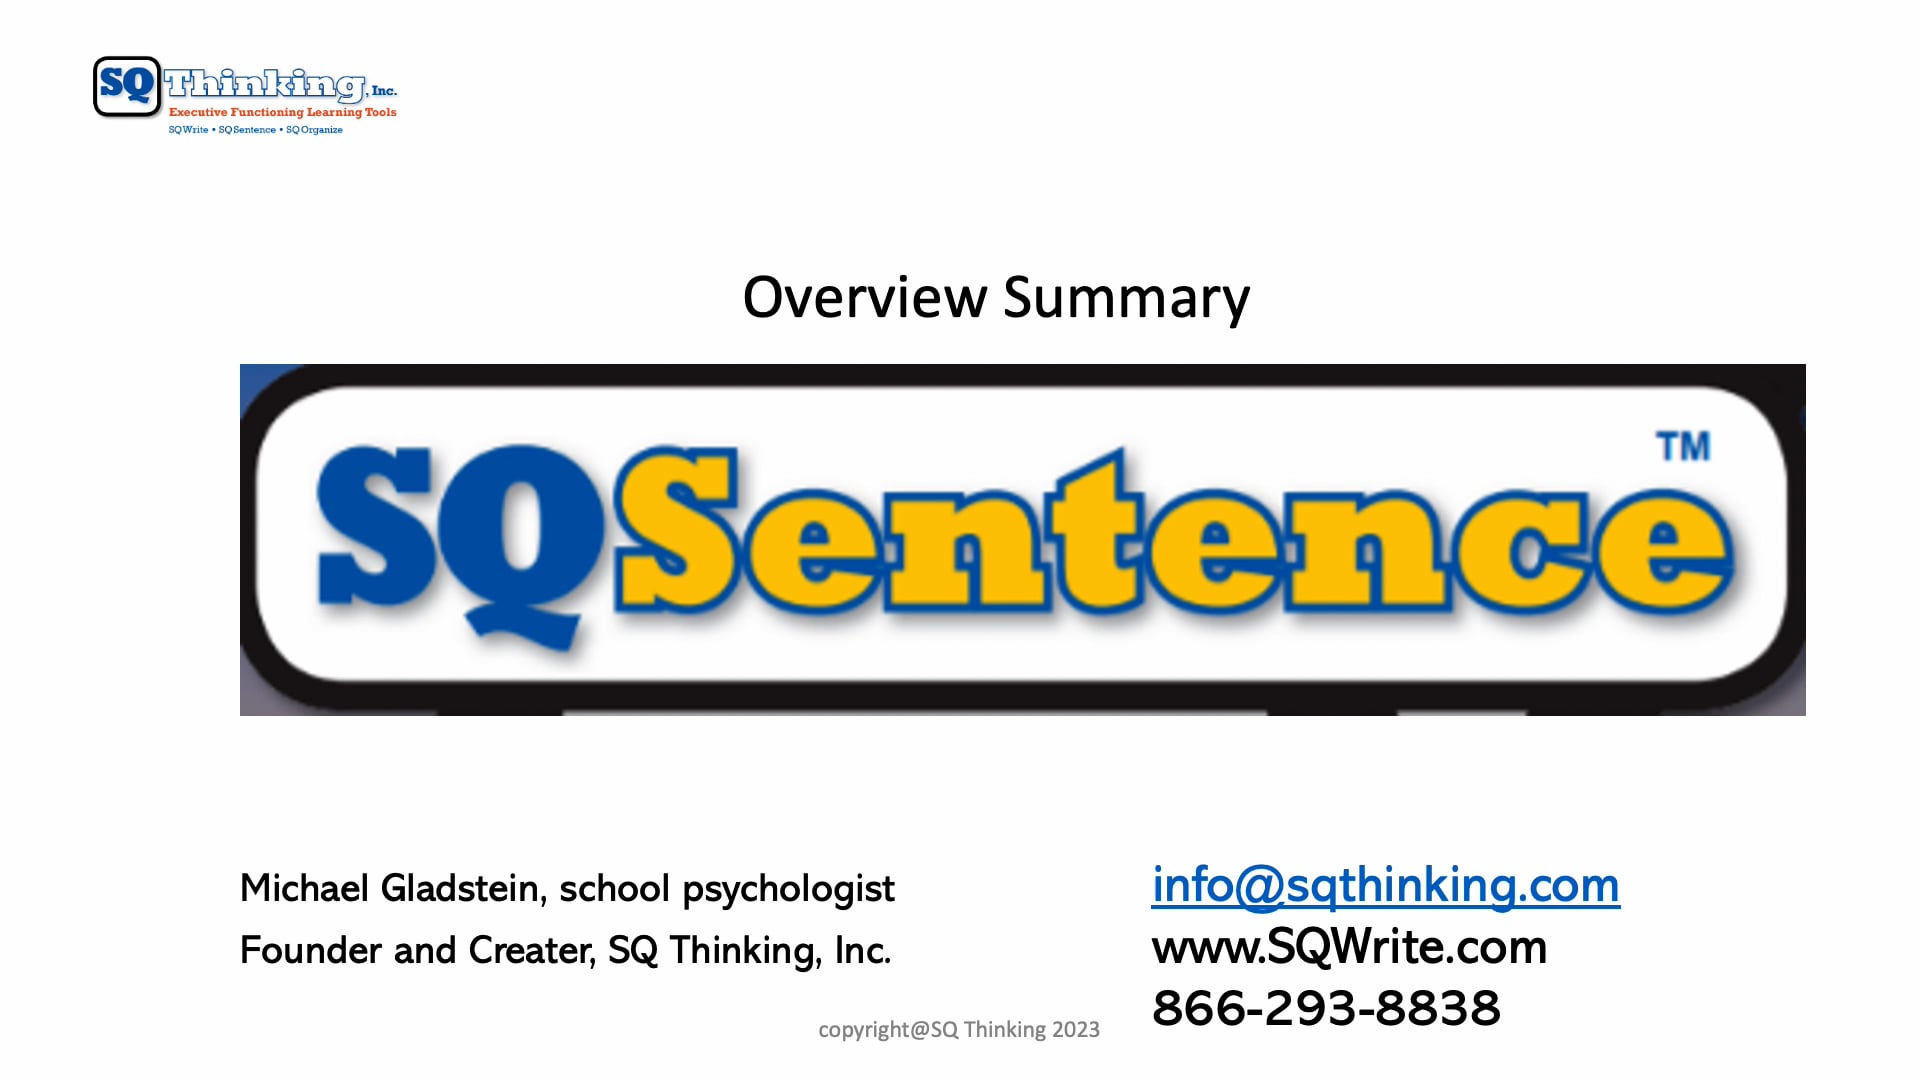 SQ Sentence Overview